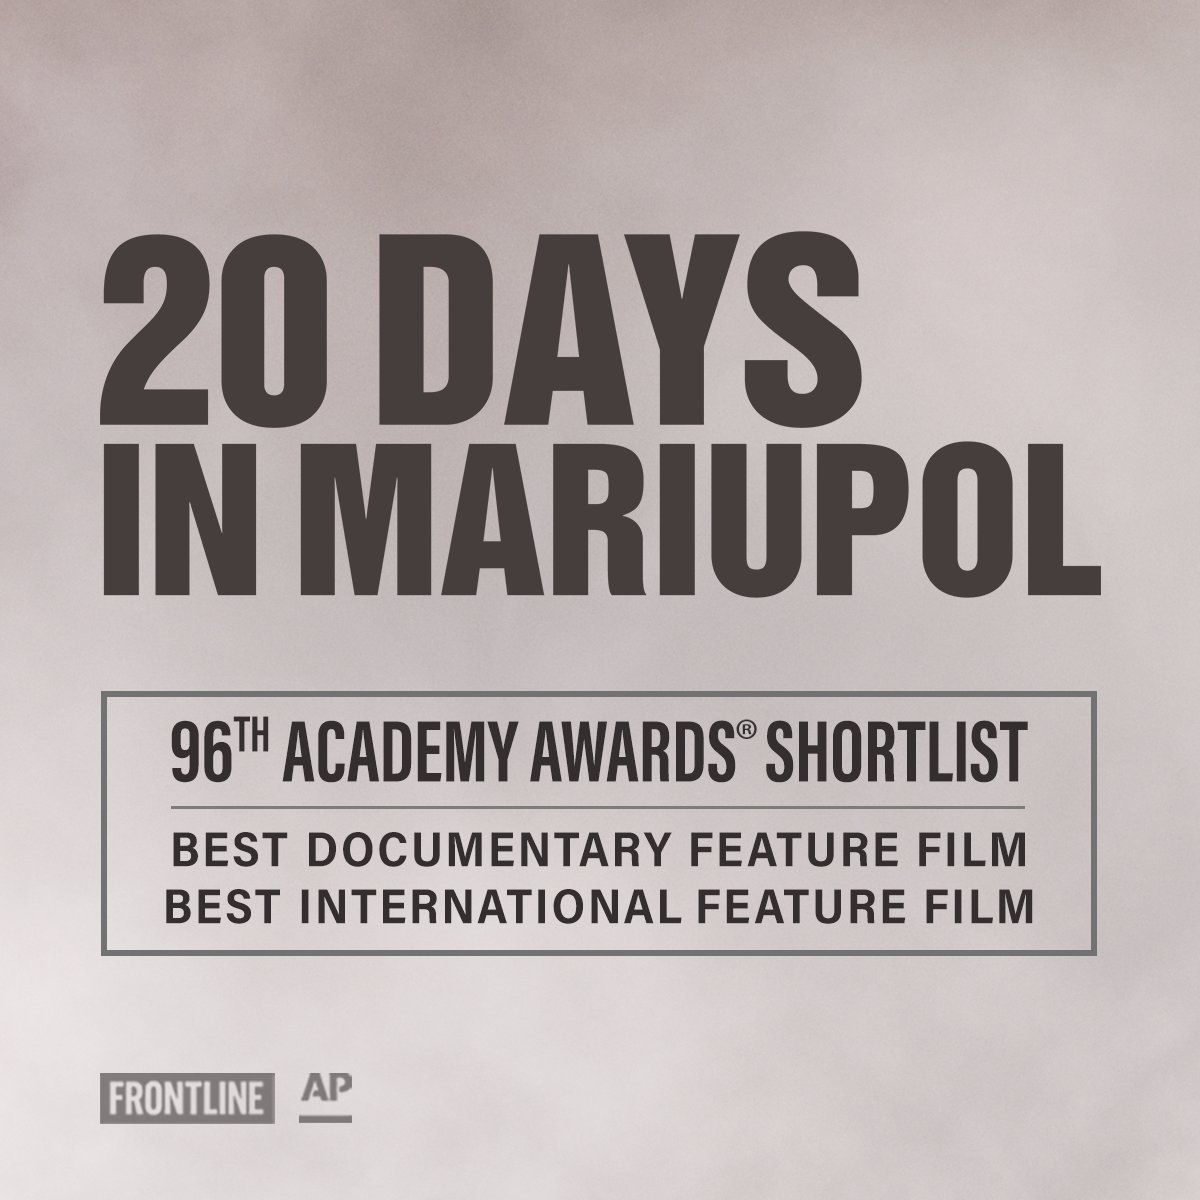 Our team is honored to be among this group of important and inspiring films. 96TH ACADEMY AWARDS® SHORTLIST 🎞️ Best Documentary Feature Film 🌐 Best International Feature Film See the full Oscars® Shortlist announcement here: bit.ly/96th-Shortlists